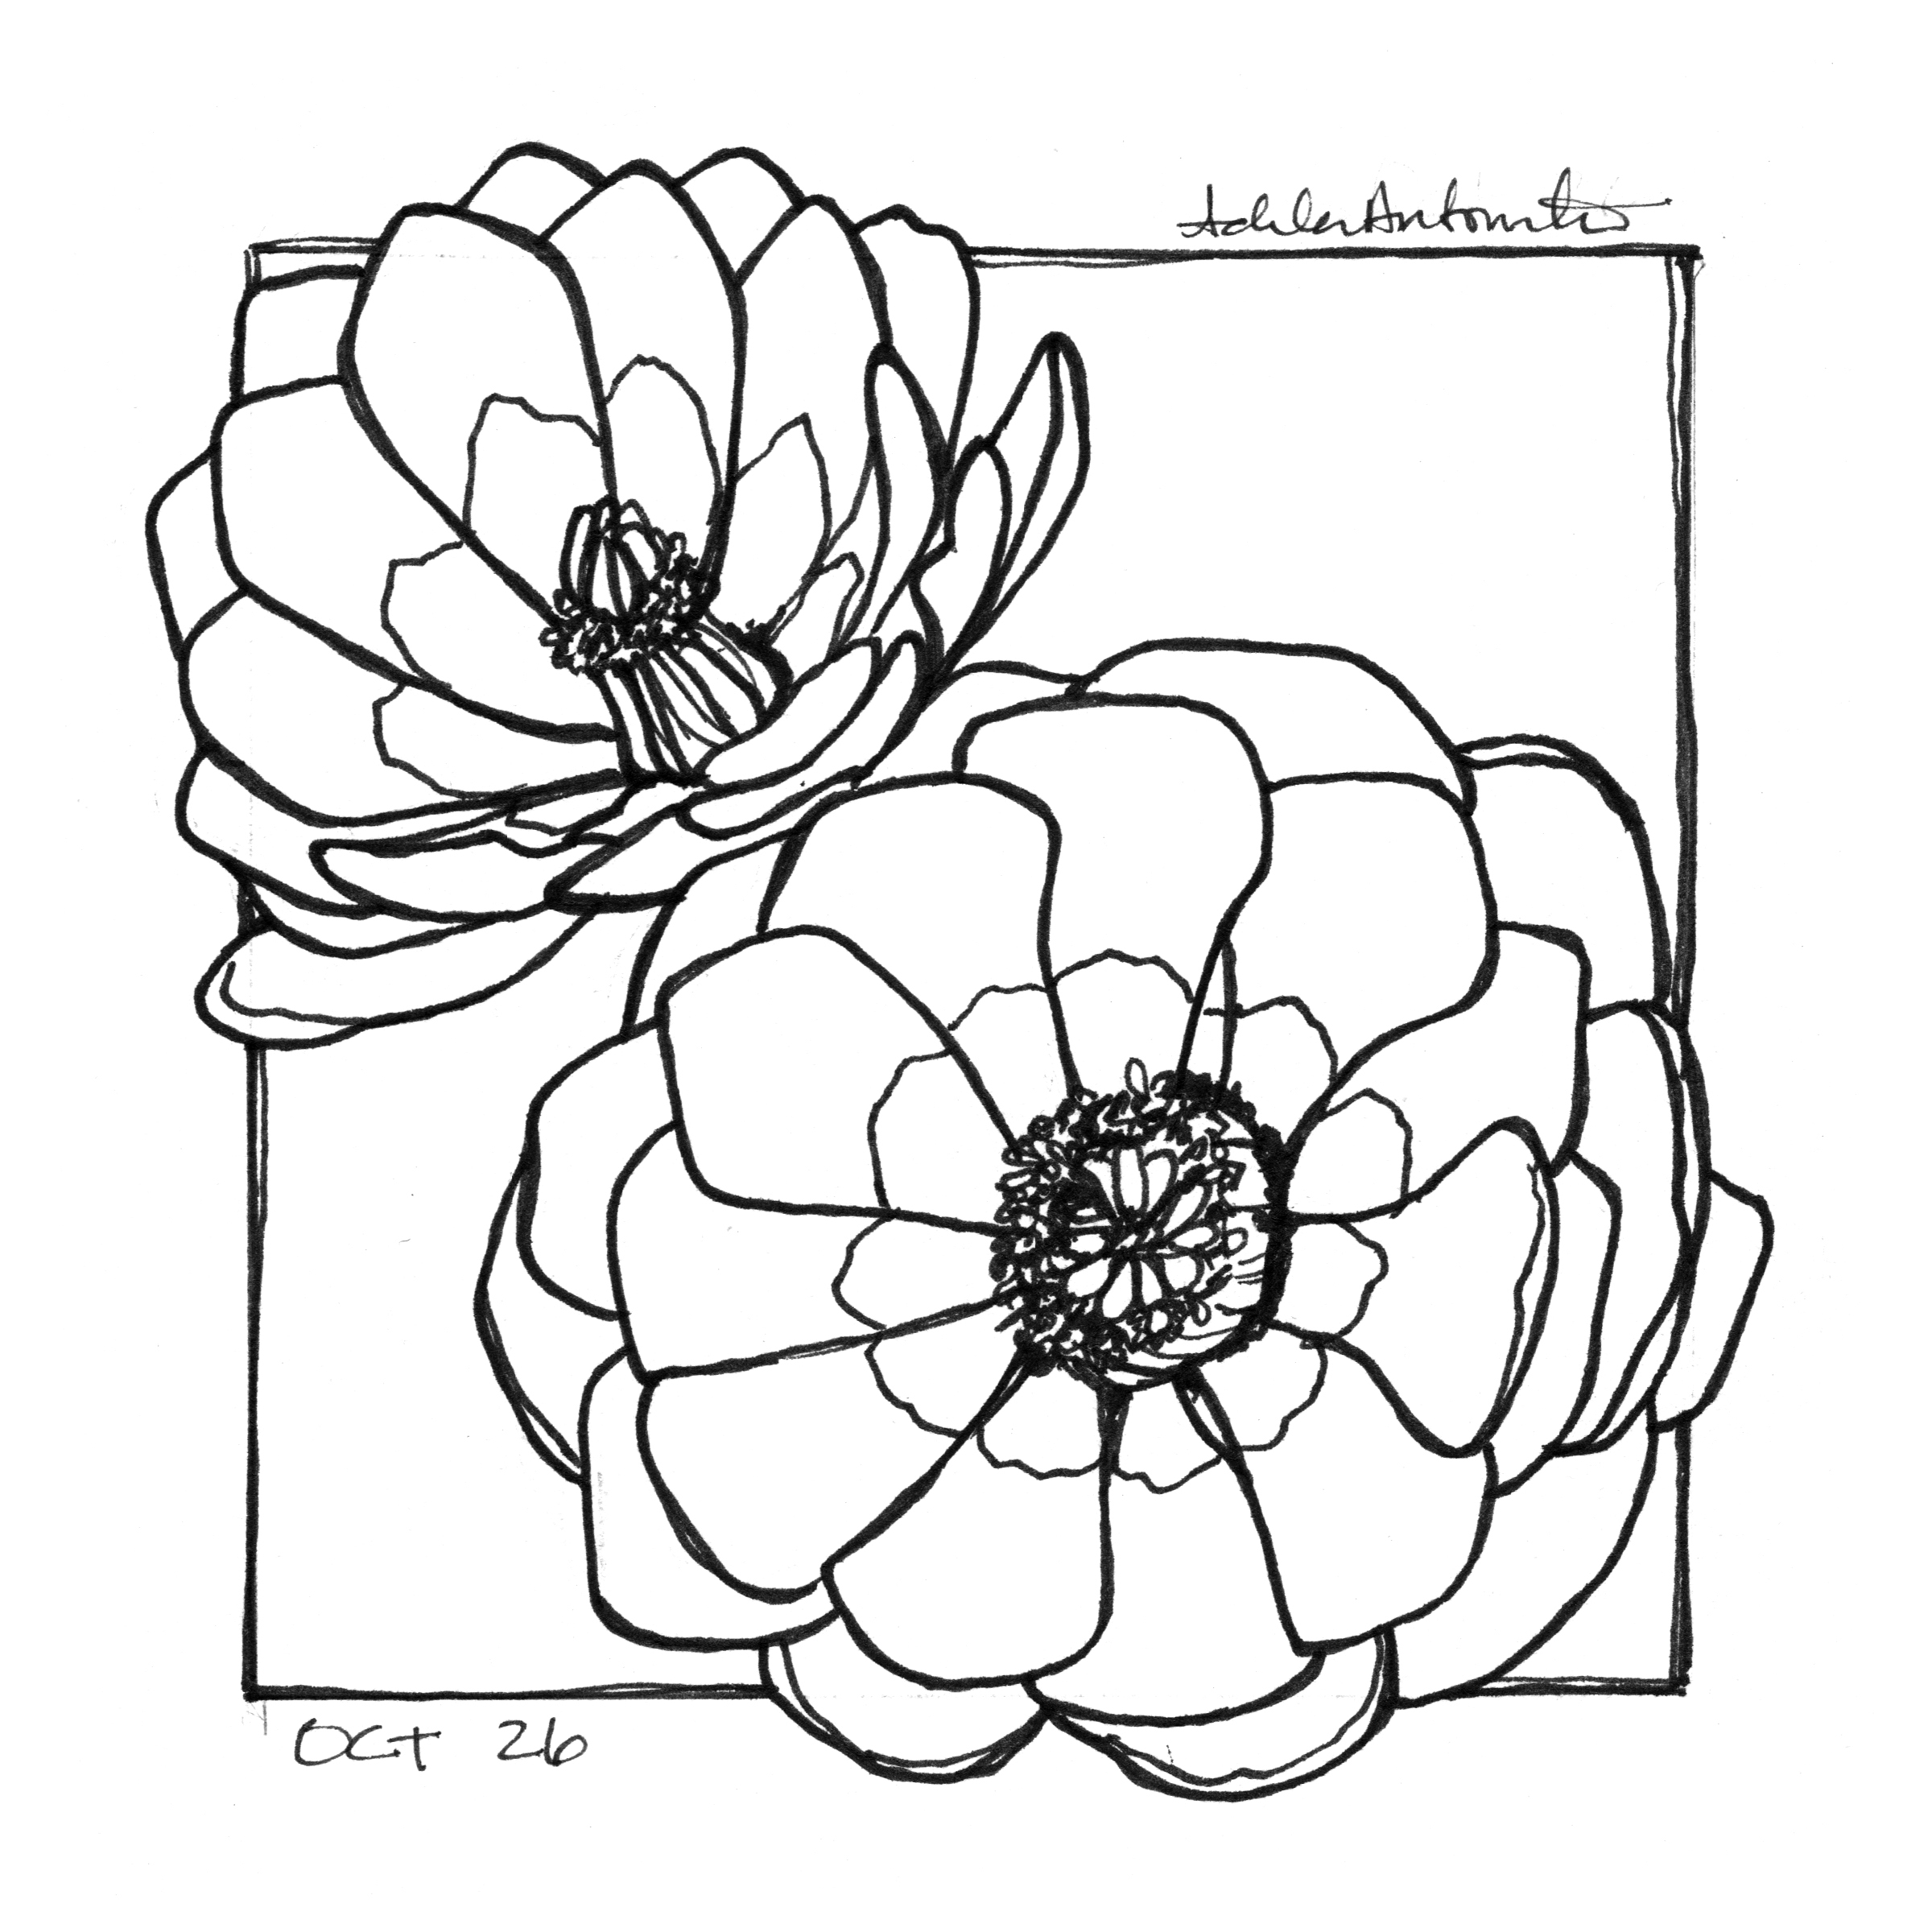 Drawing of flowers